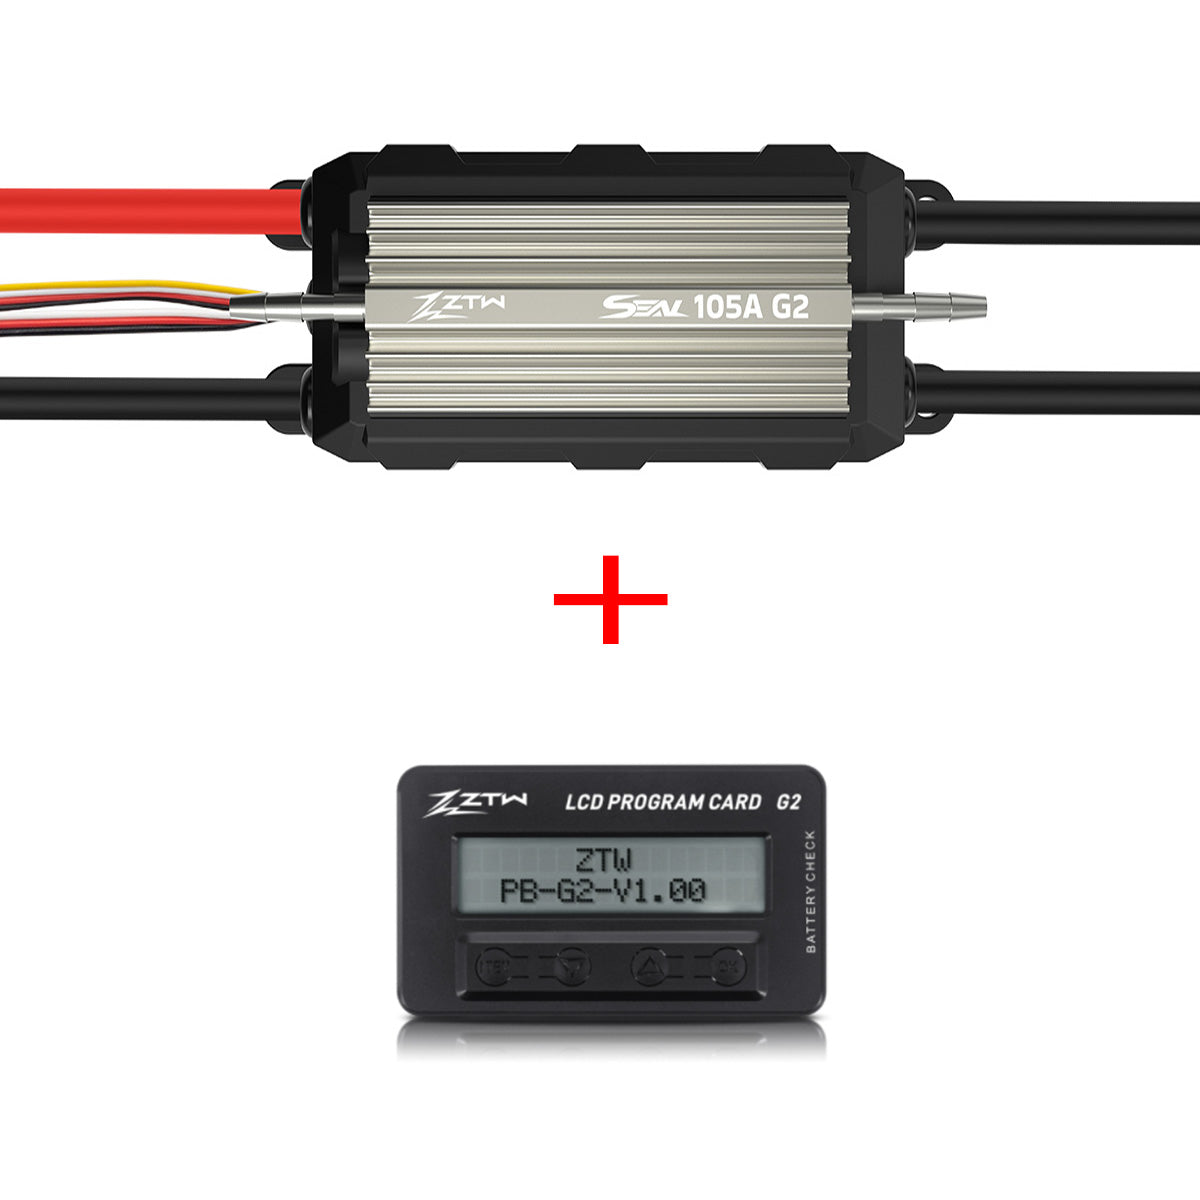 ZTW 32-Bit Seal G2 90A/105A/130A ESC 3-8S With SBEC 6V/7.4V/8.4V 8A Waterproof Bidirectional Speed Controller For RC Racing Boat